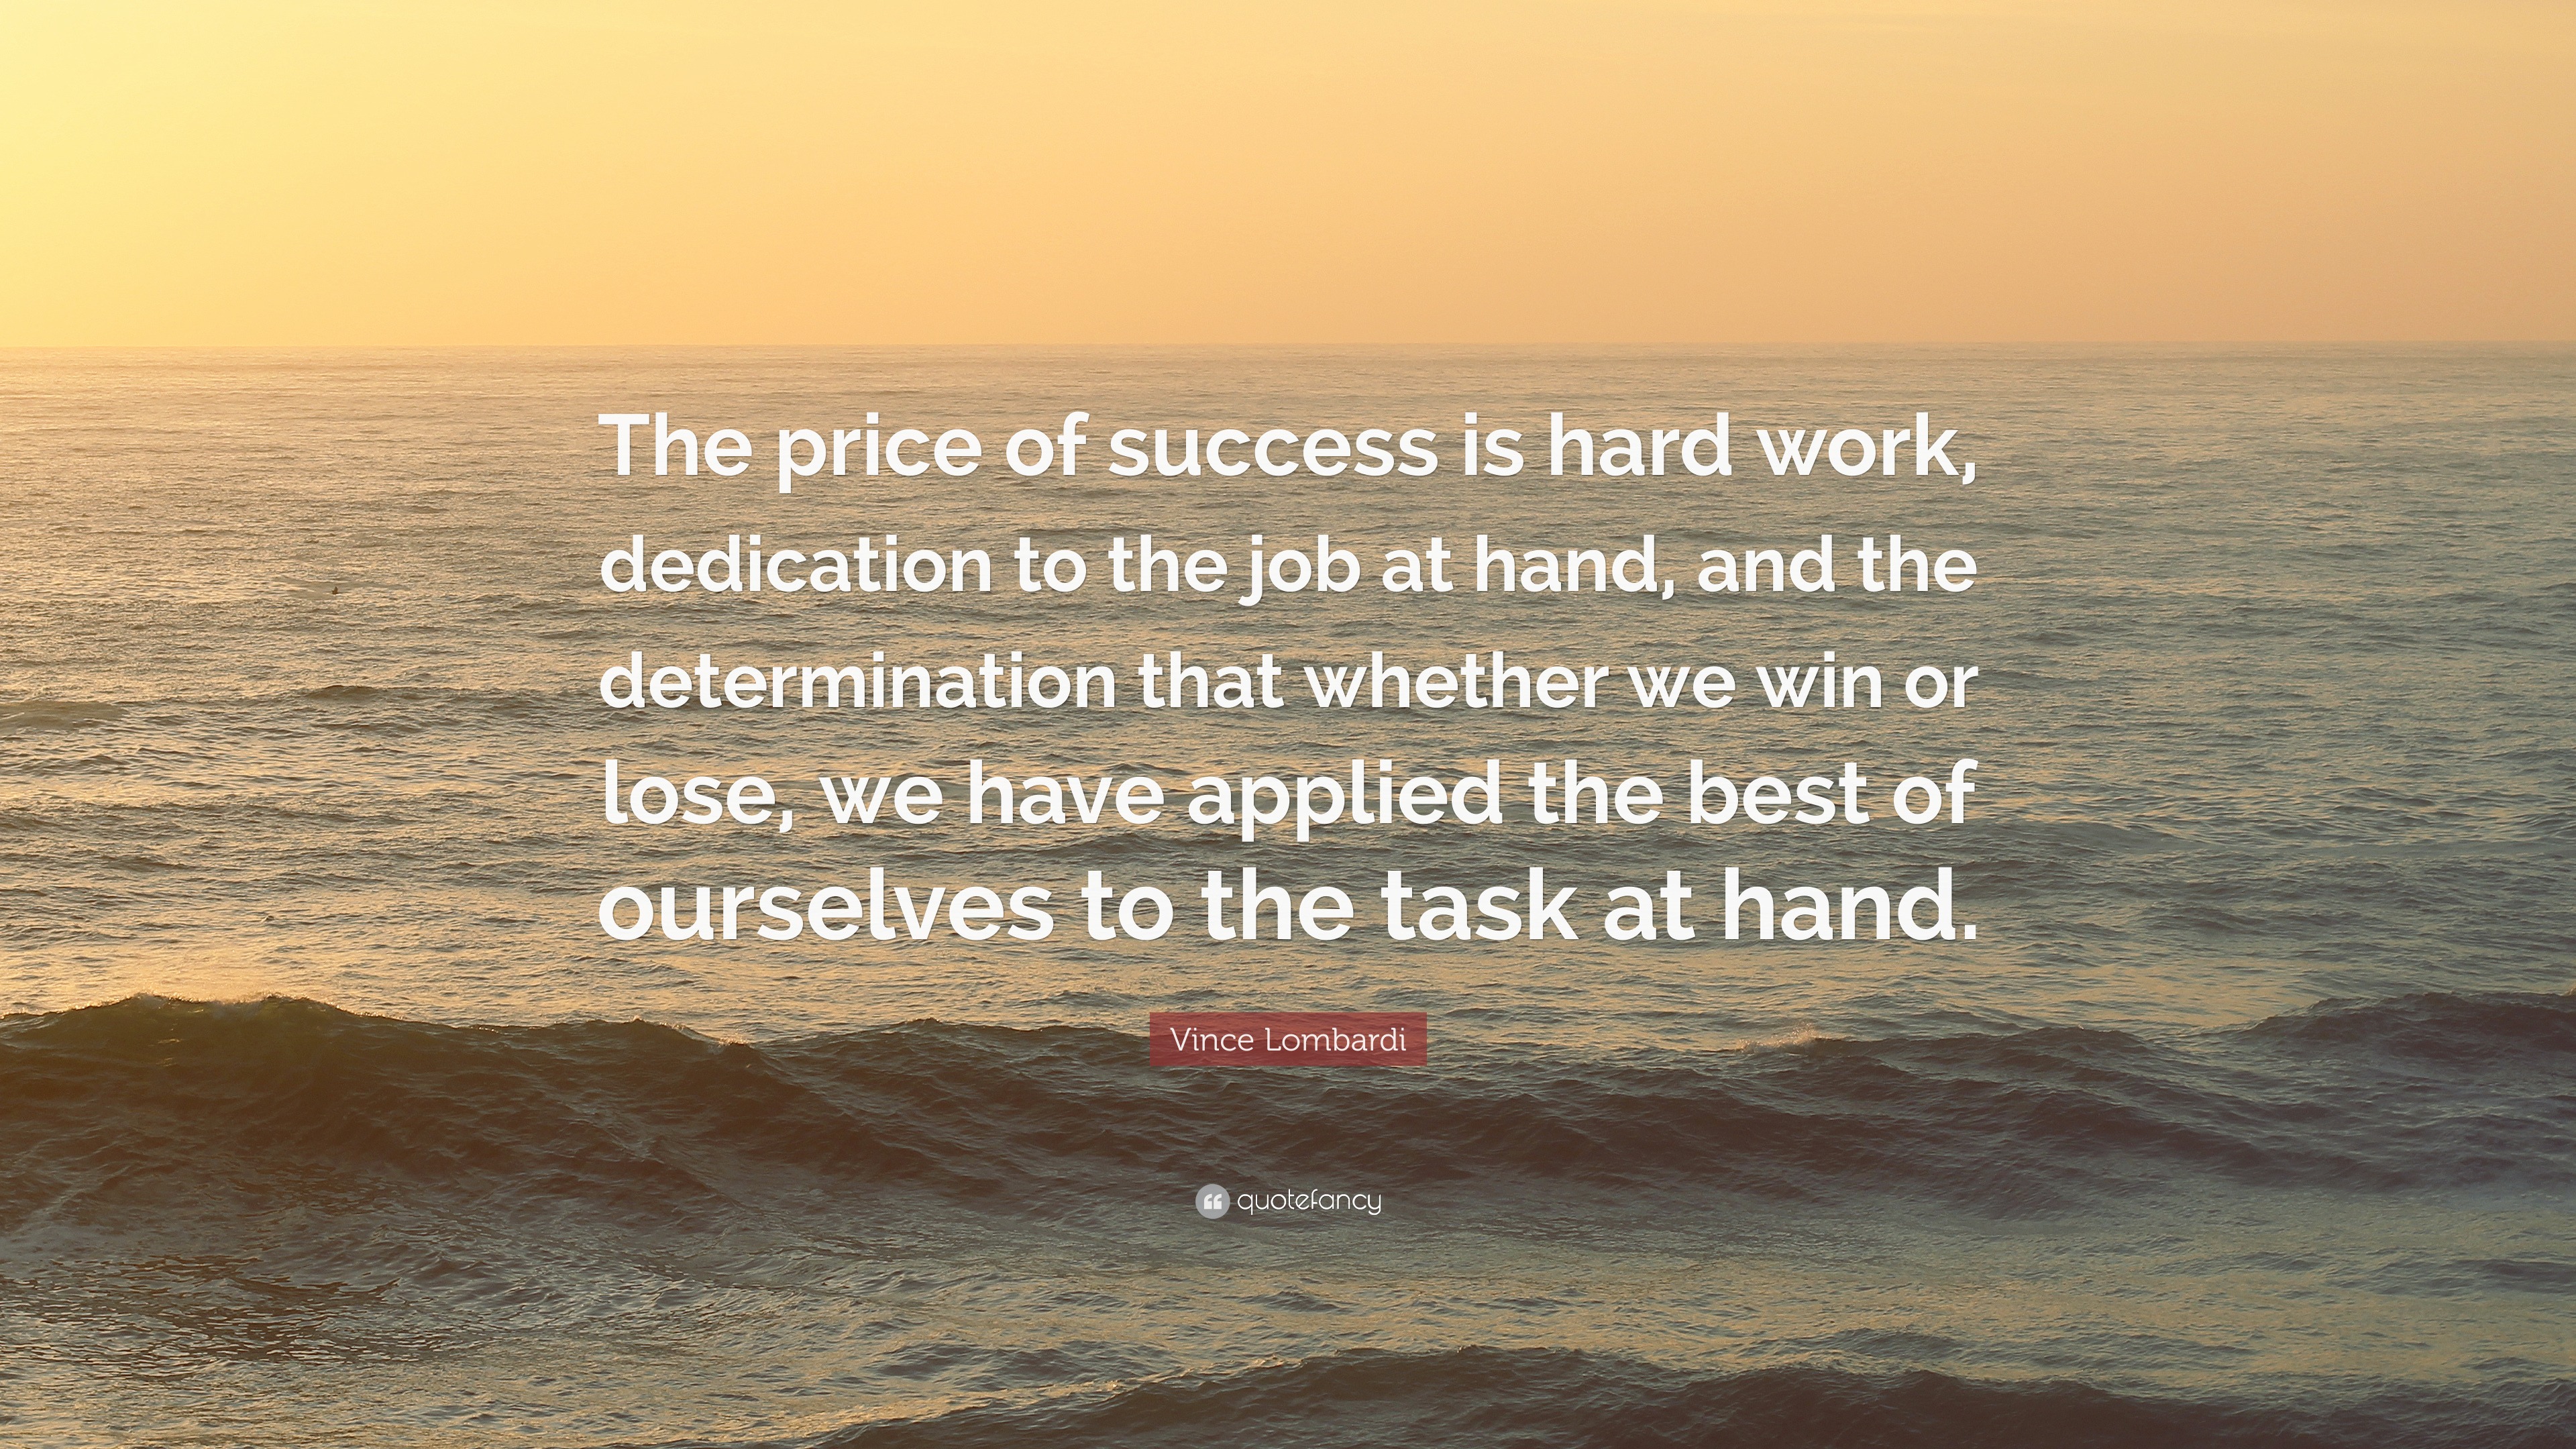 Vince Lombardi Quote “The price of success is hard work